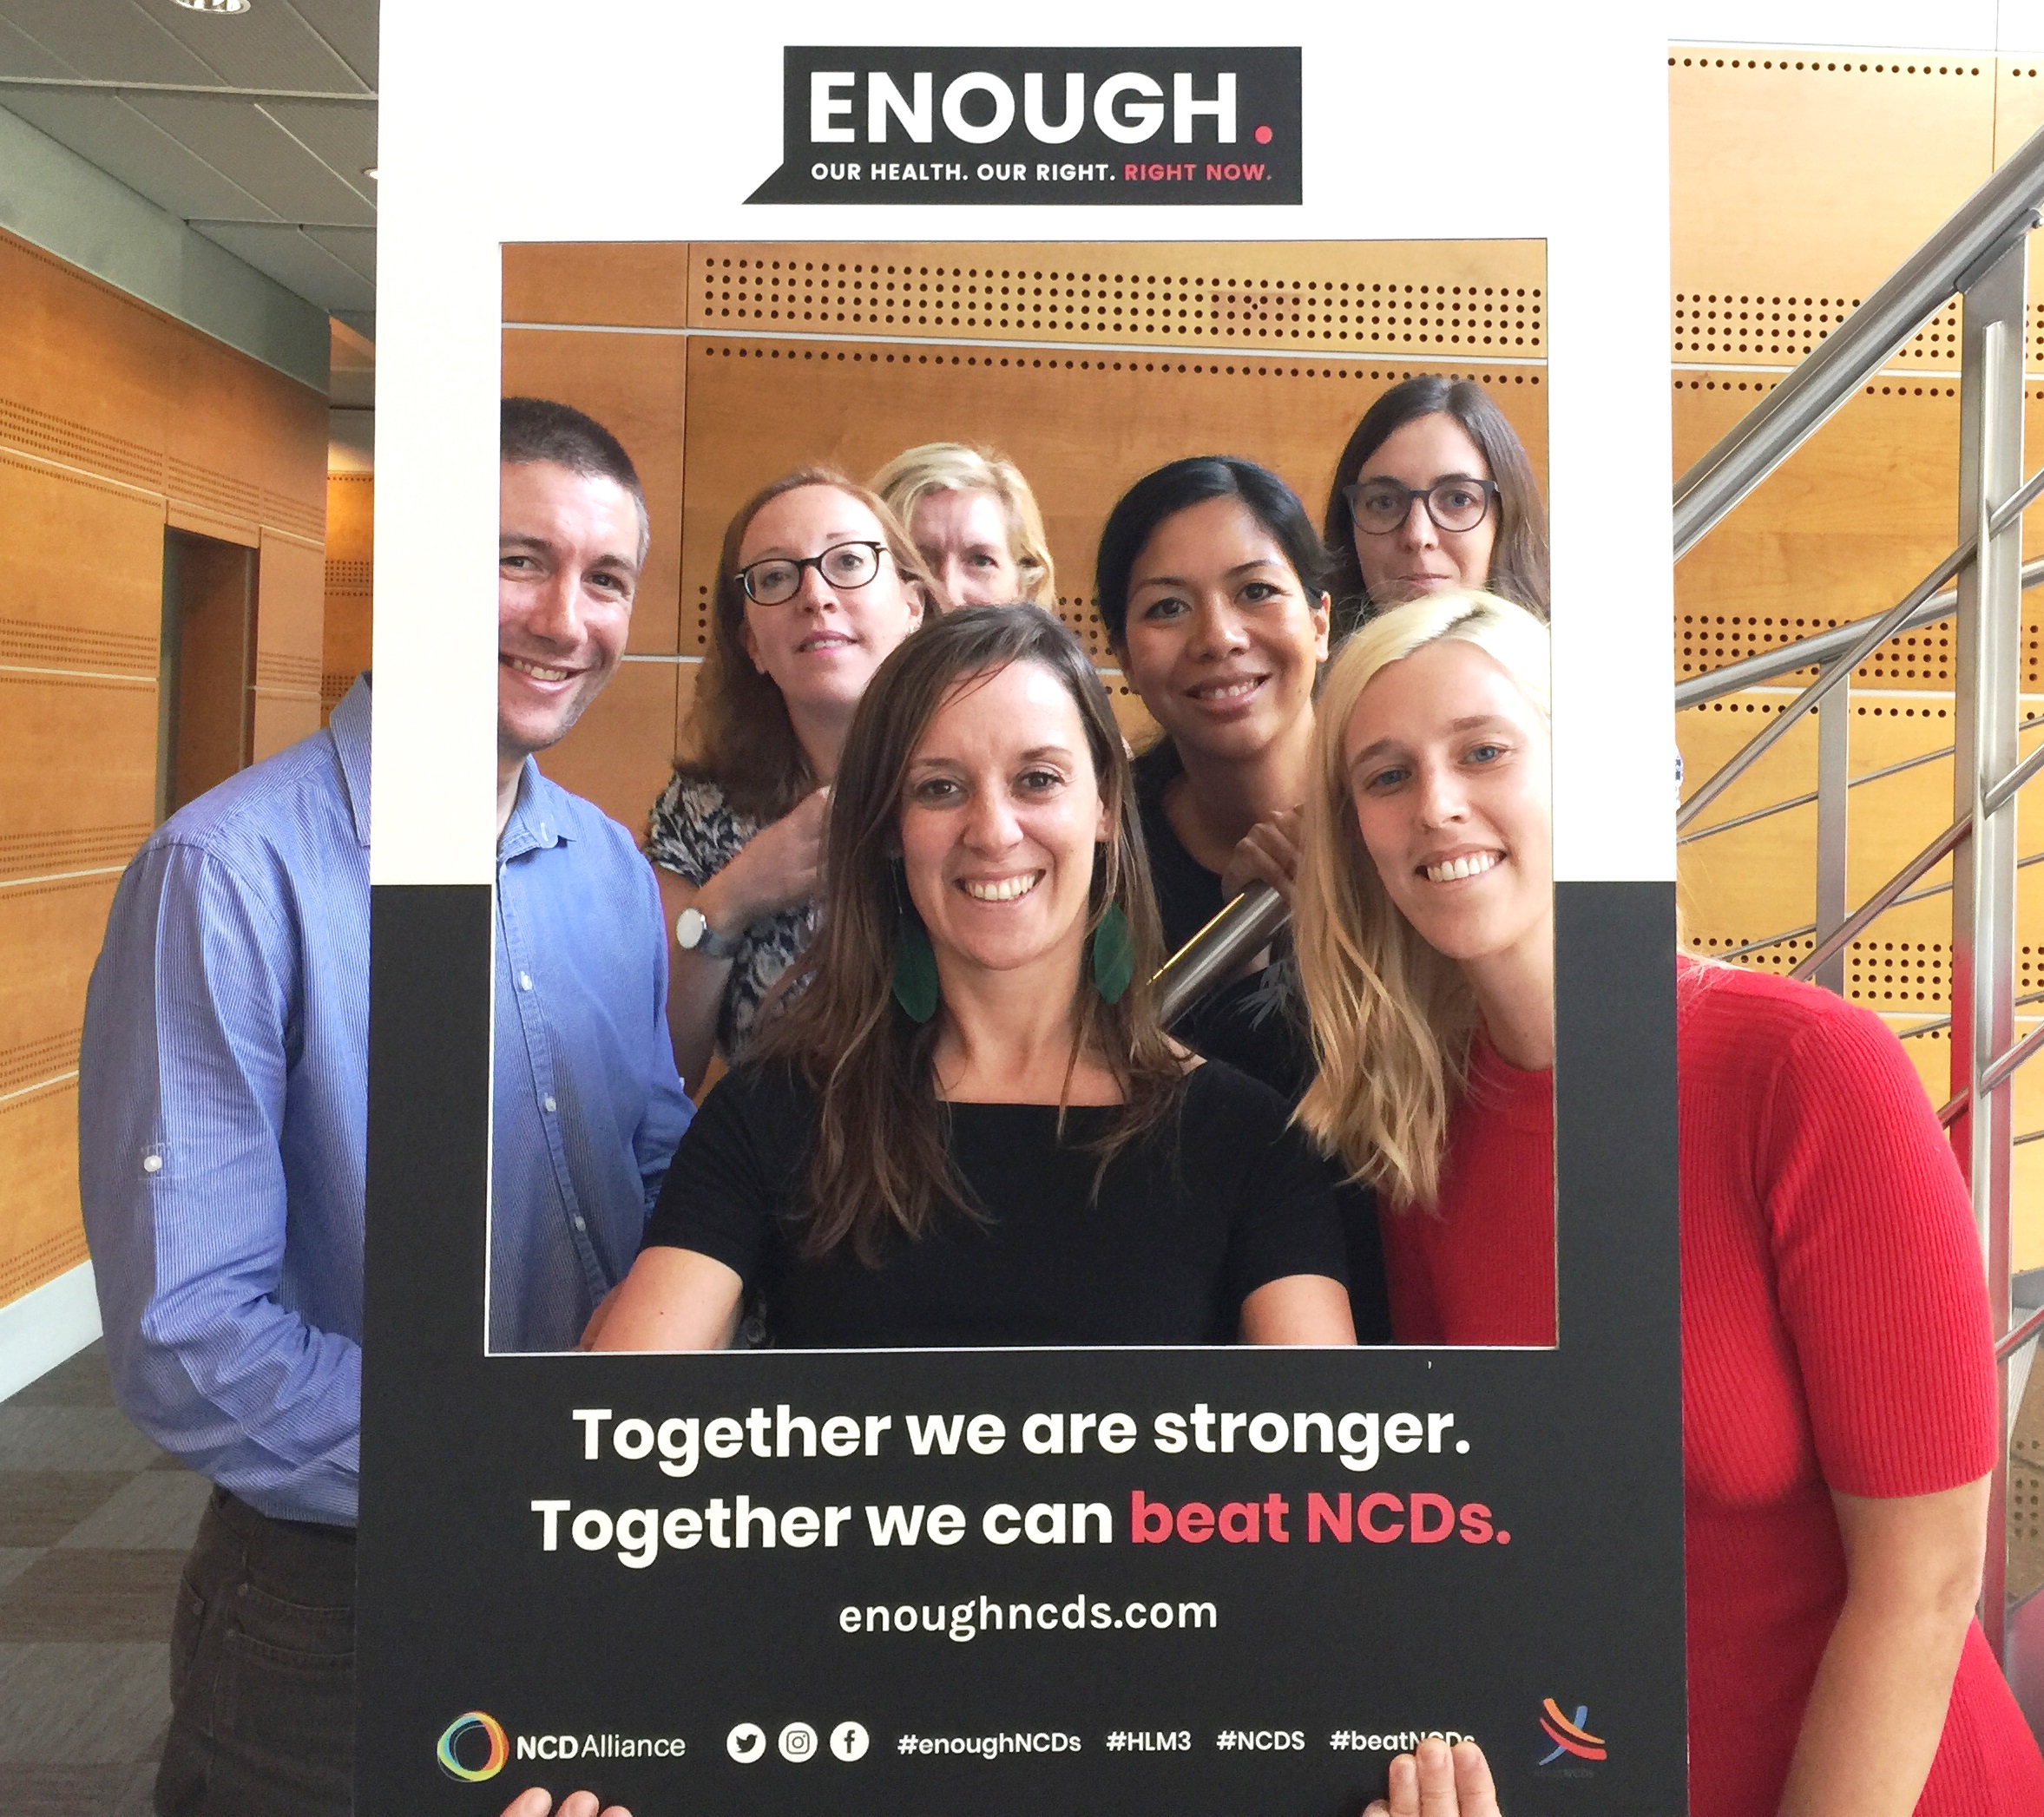 Staff from Union for International Cancer Control (UICC) appear in a giant frame, with branding of the ENOUGH NCDs campaign.